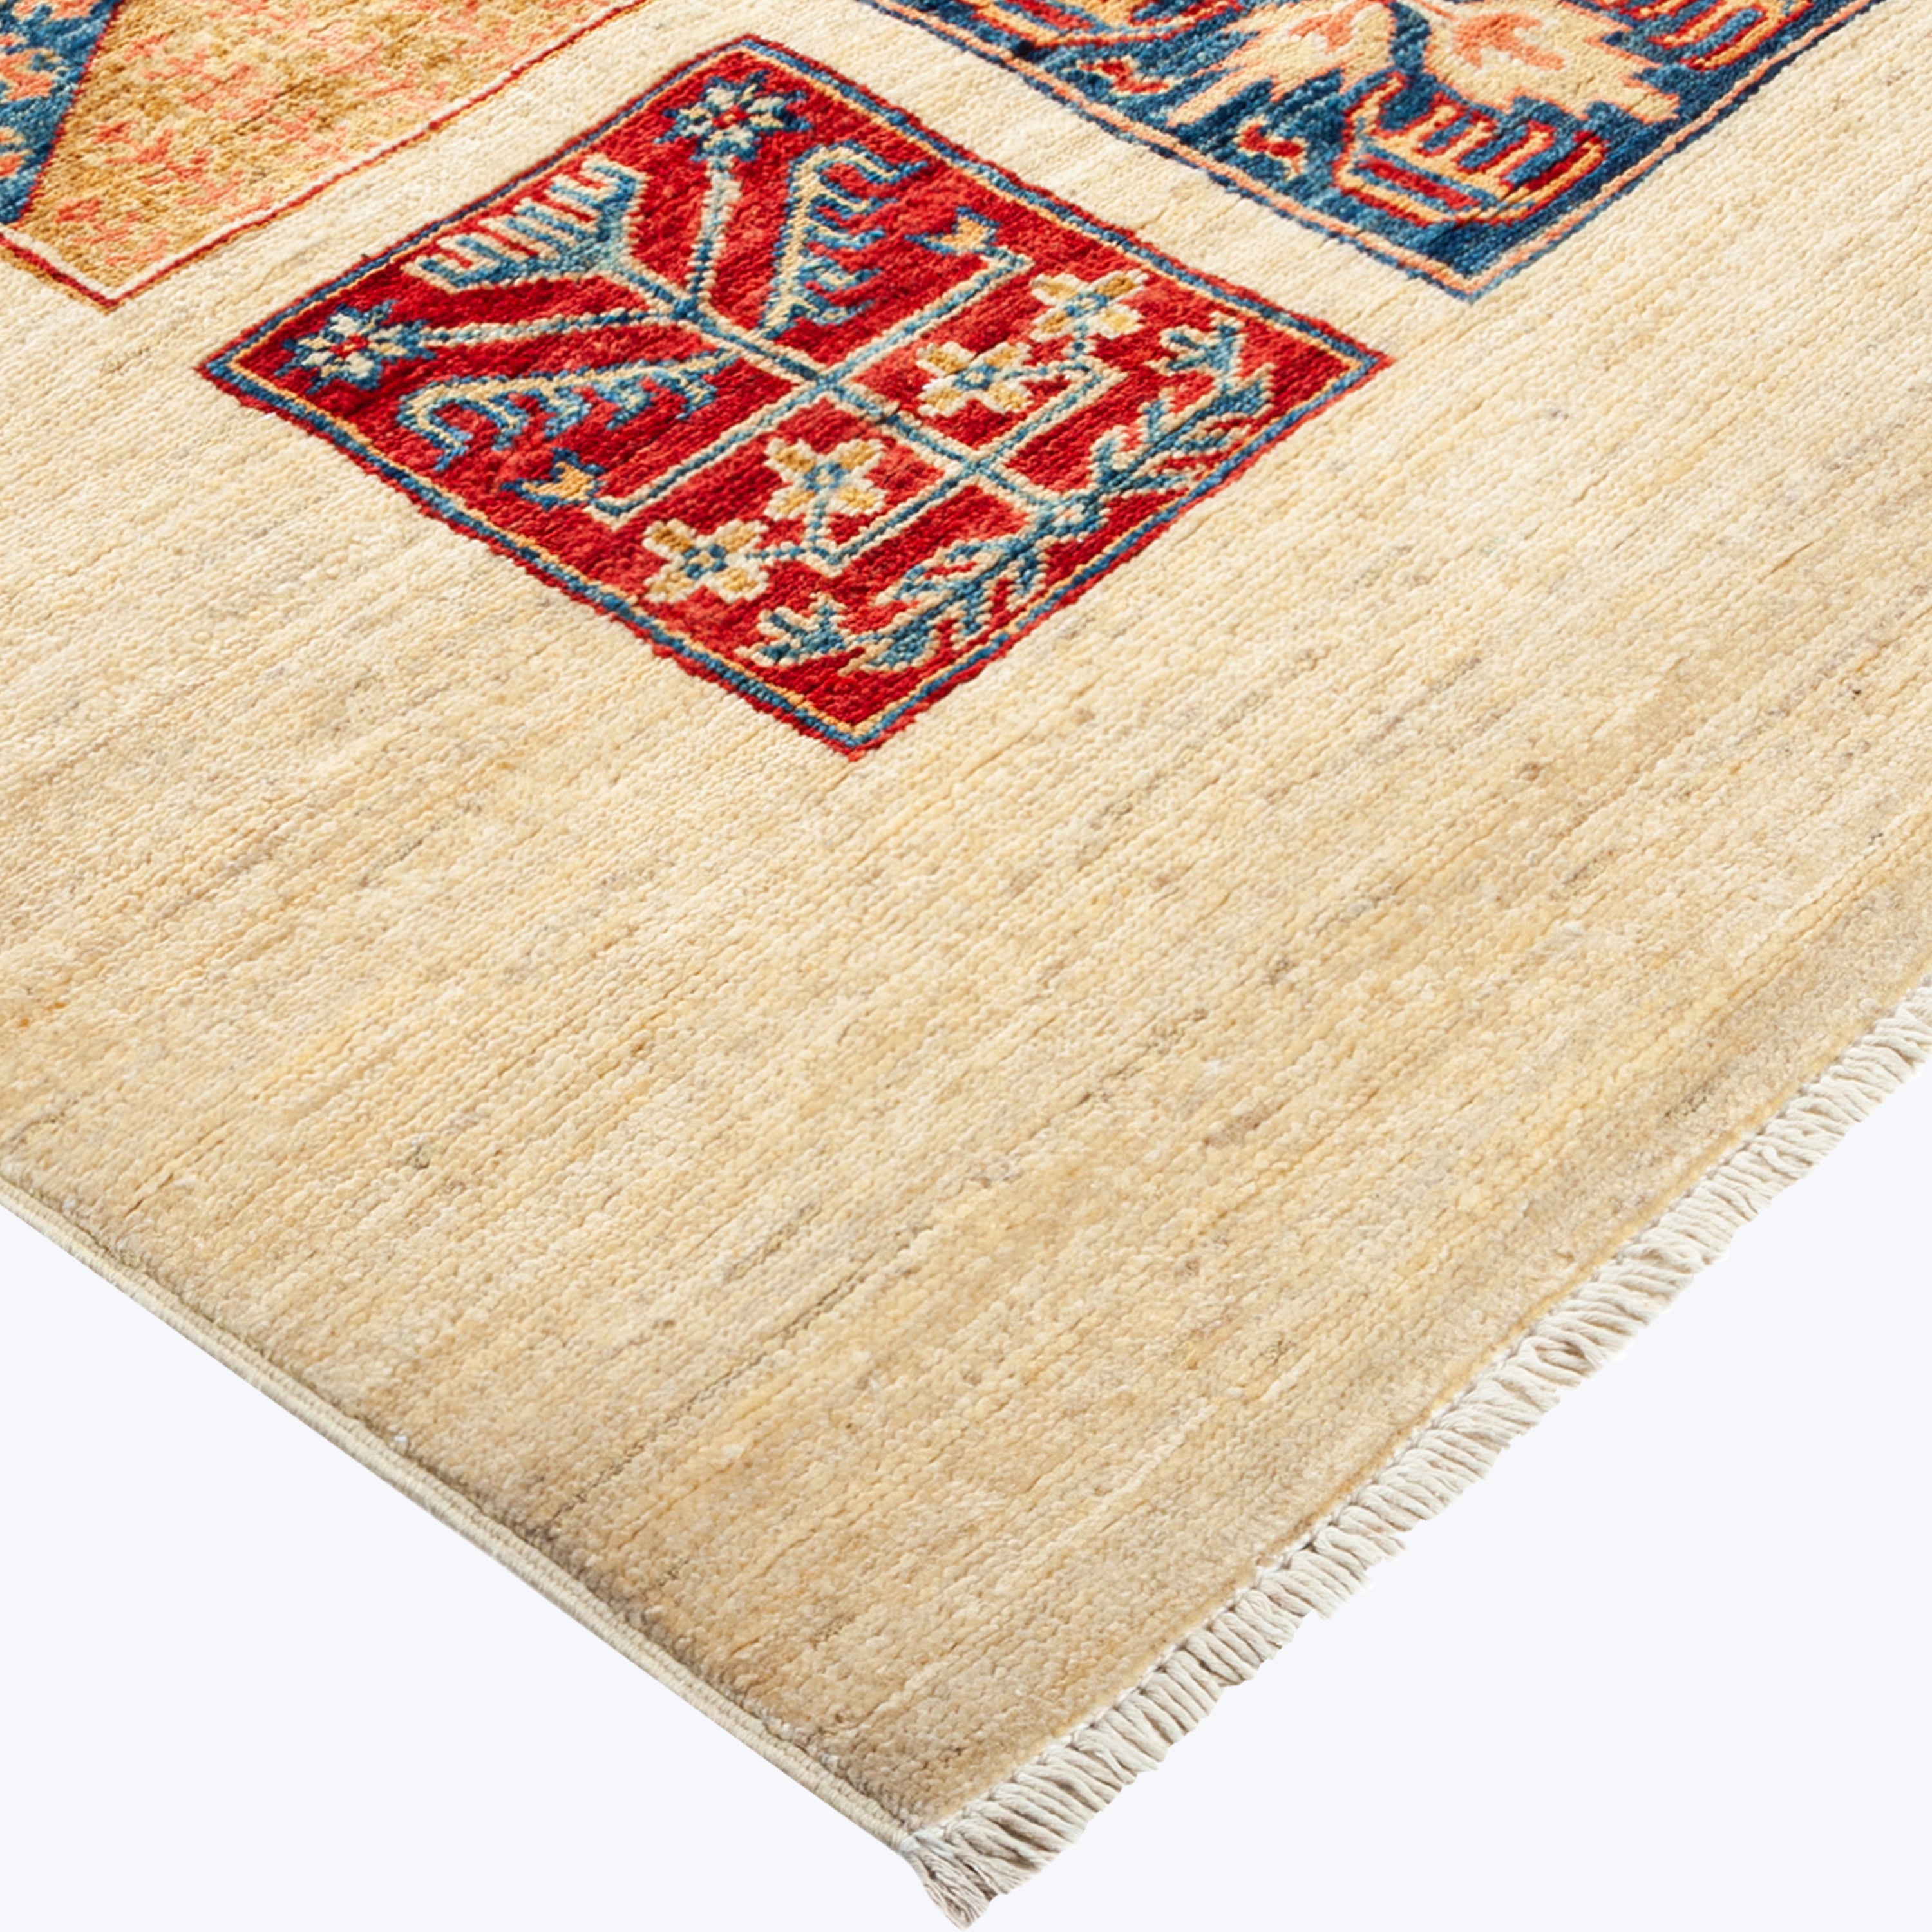 IVORY TRADITIONAL WOOL RUG - 4' 10" x 6' 7"